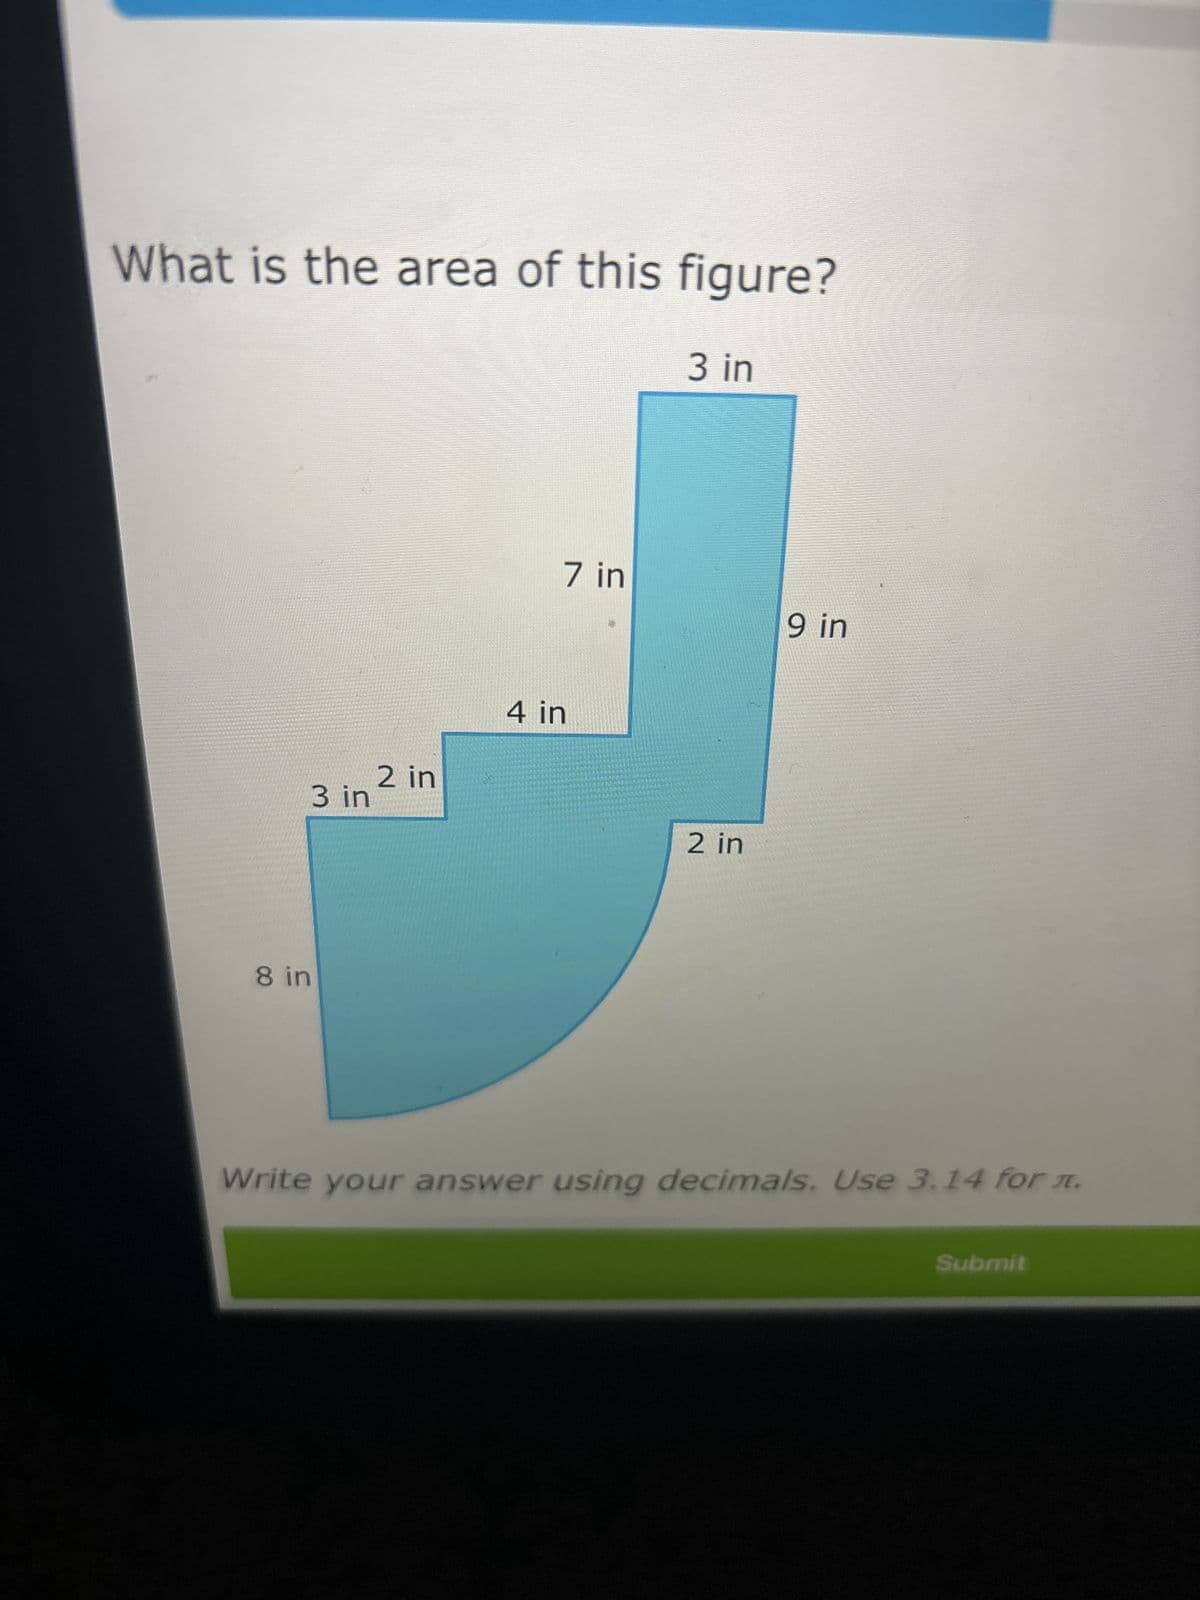 What is the area of this figure?
3 in
8 in
3 in
2 in
4 in
7 in
2 in
9 in
Write your answer using decimals. Use 3.14 for л.
Submit